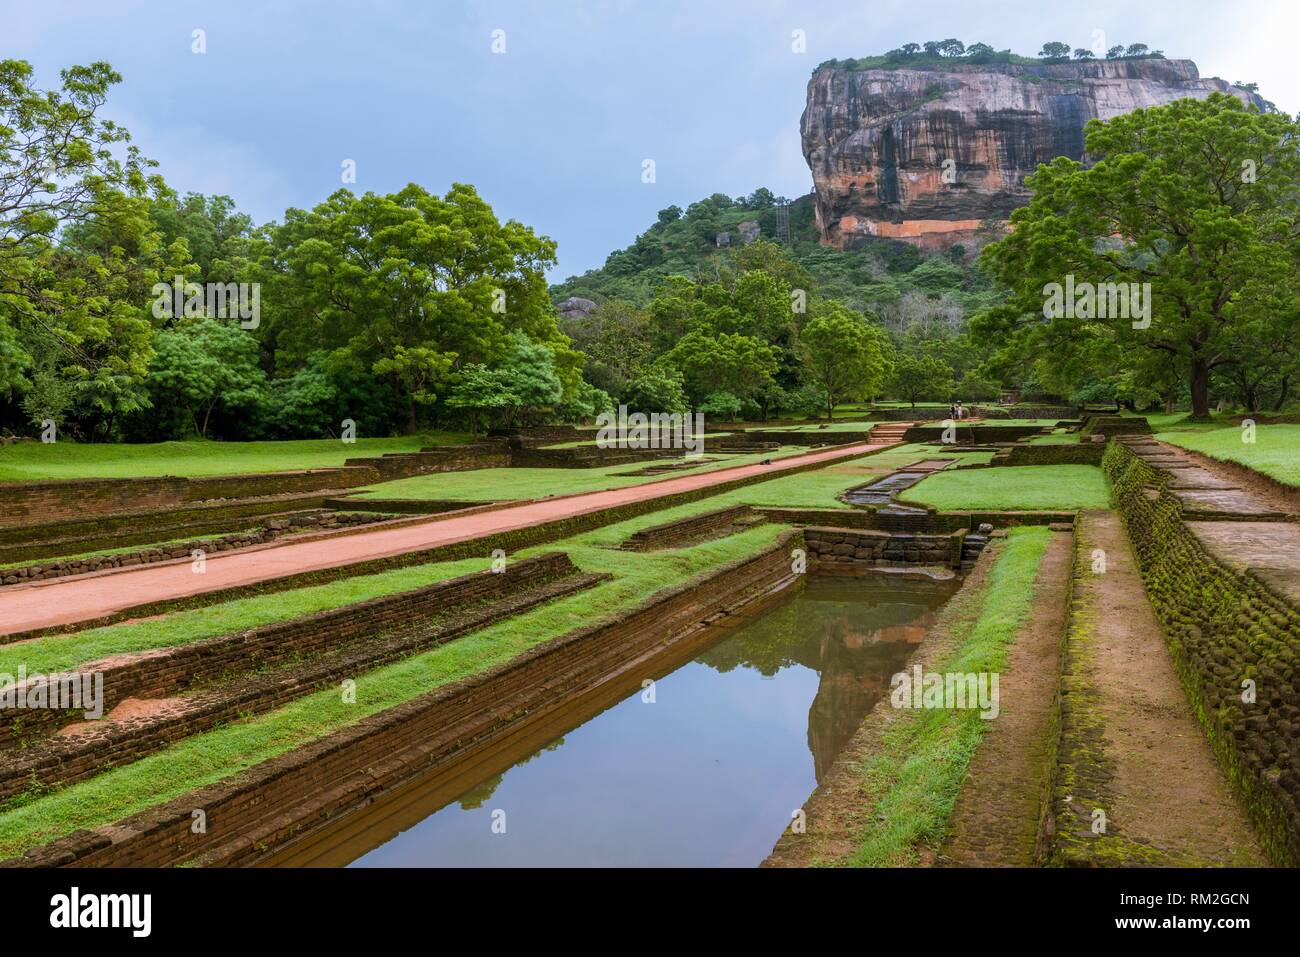 A pool in the Water Gardens complex of Sigiriya Lion Rock Fortress, Ancient City of Sigiriya, North Central Province, Sri Lanka, Asia. Stock Photo